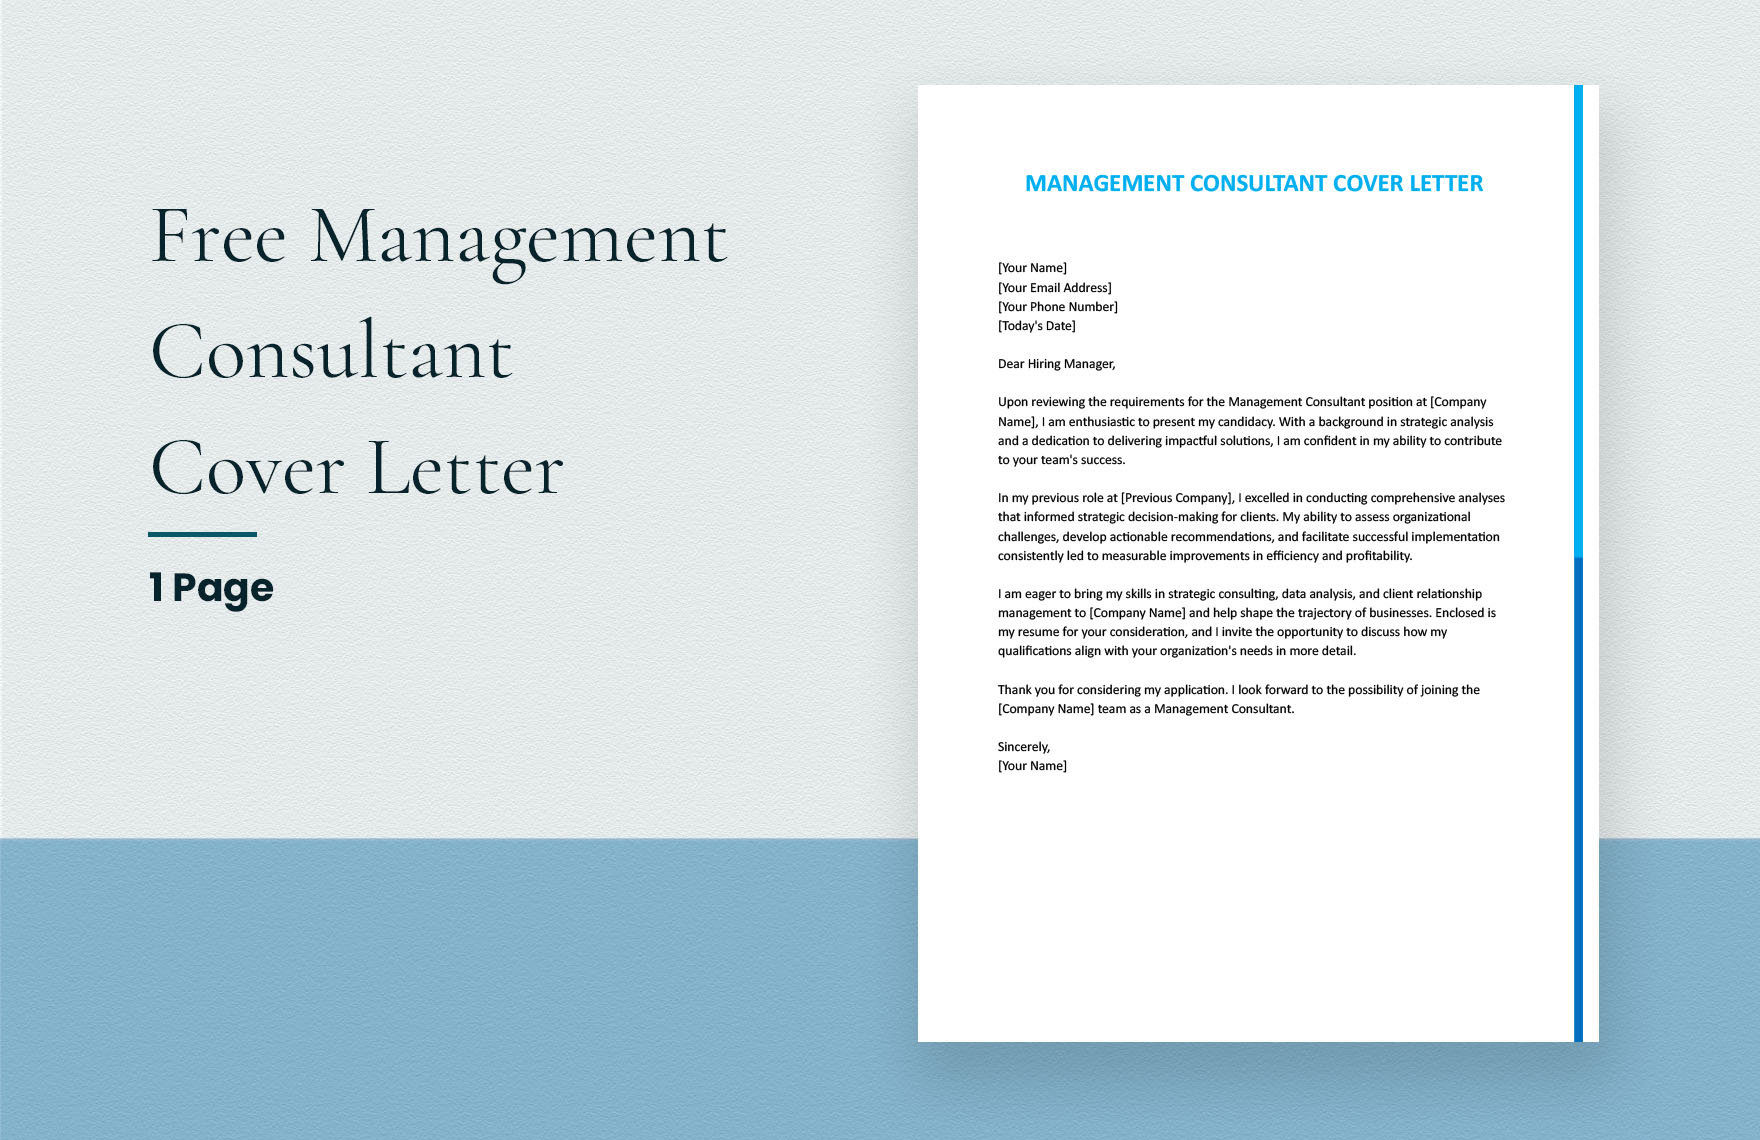 Management Consultant Cover Letter